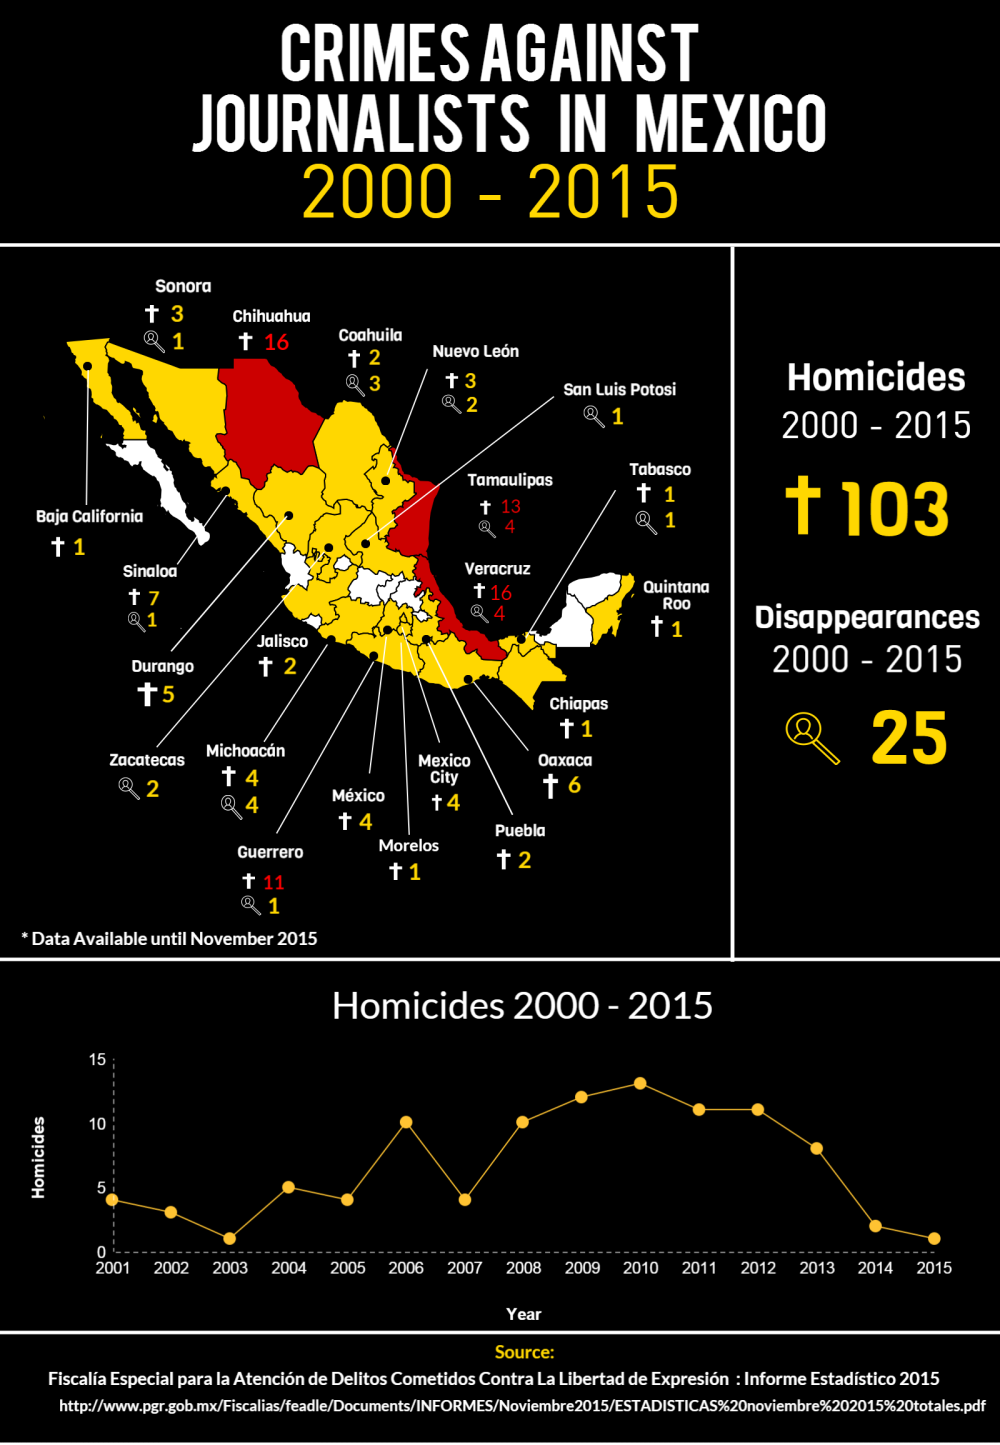 Infographic | Crimes against Journalists in Mexico 2000-2015